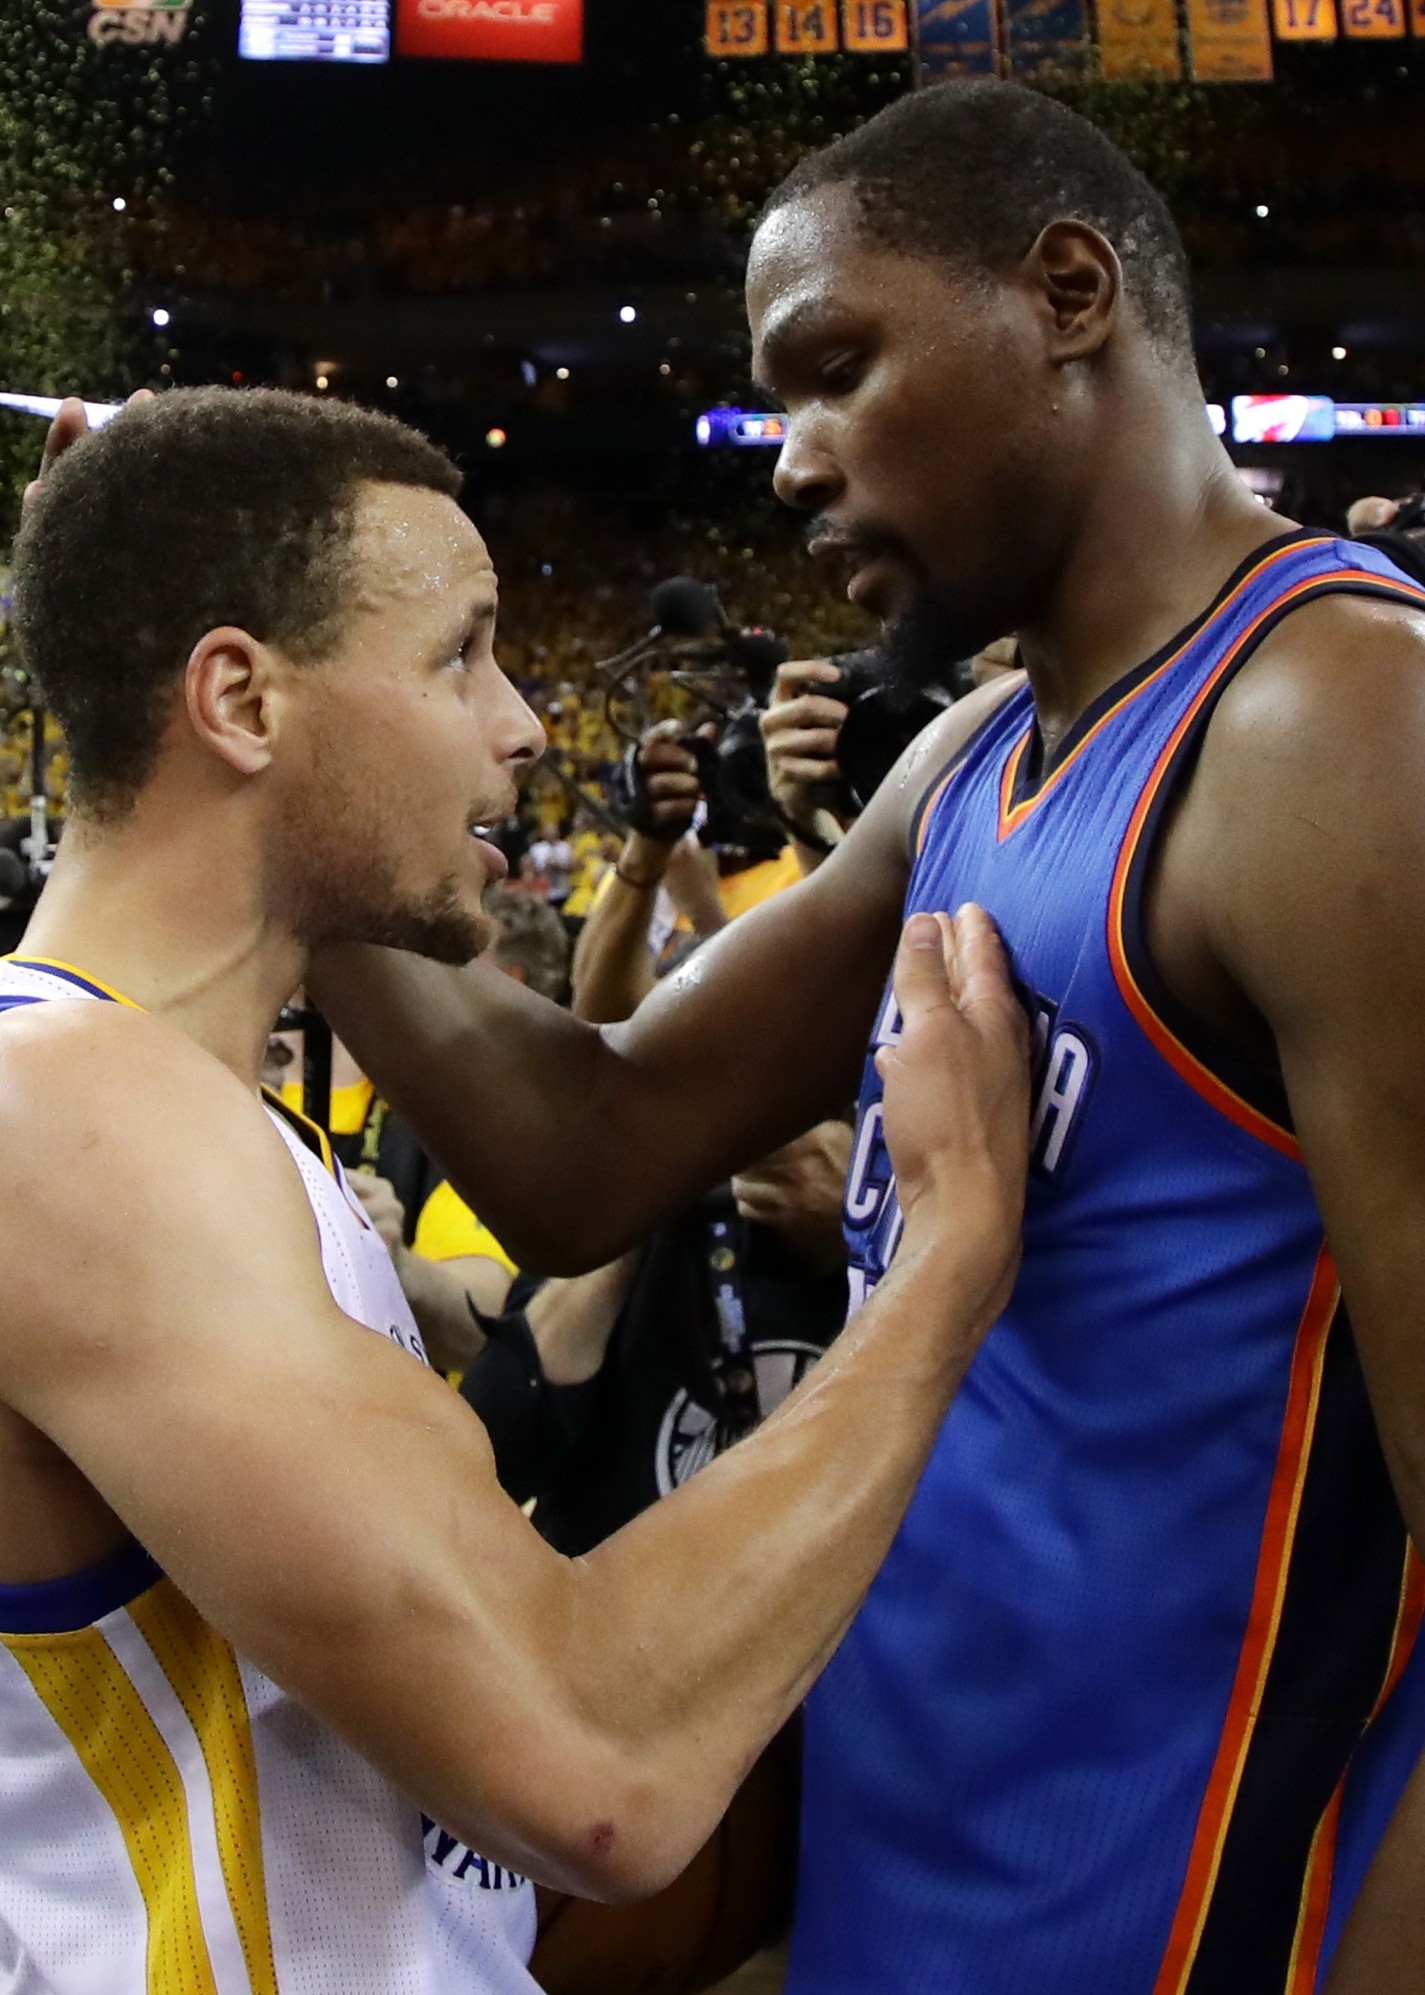 OAKLAND, CA - MAY 30:  Stephen Curry #30 of the Golden State Warriors speaks with Kevin Durant #35 of the Oklahoma City Thunder after their 96-88 win in Game Seven of the Western Conference Finals during the 2016 NBA Playoffs at ORACLE Arena on May 30, 2016 in Oakland, California. NOTE TO USER: User expressly acknowledges and agrees that, by downloading and or using this photograph, User is consenting to the terms and conditions of the Getty Images License Agreement.  (Photo by Ezra Shaw/Getty Images)